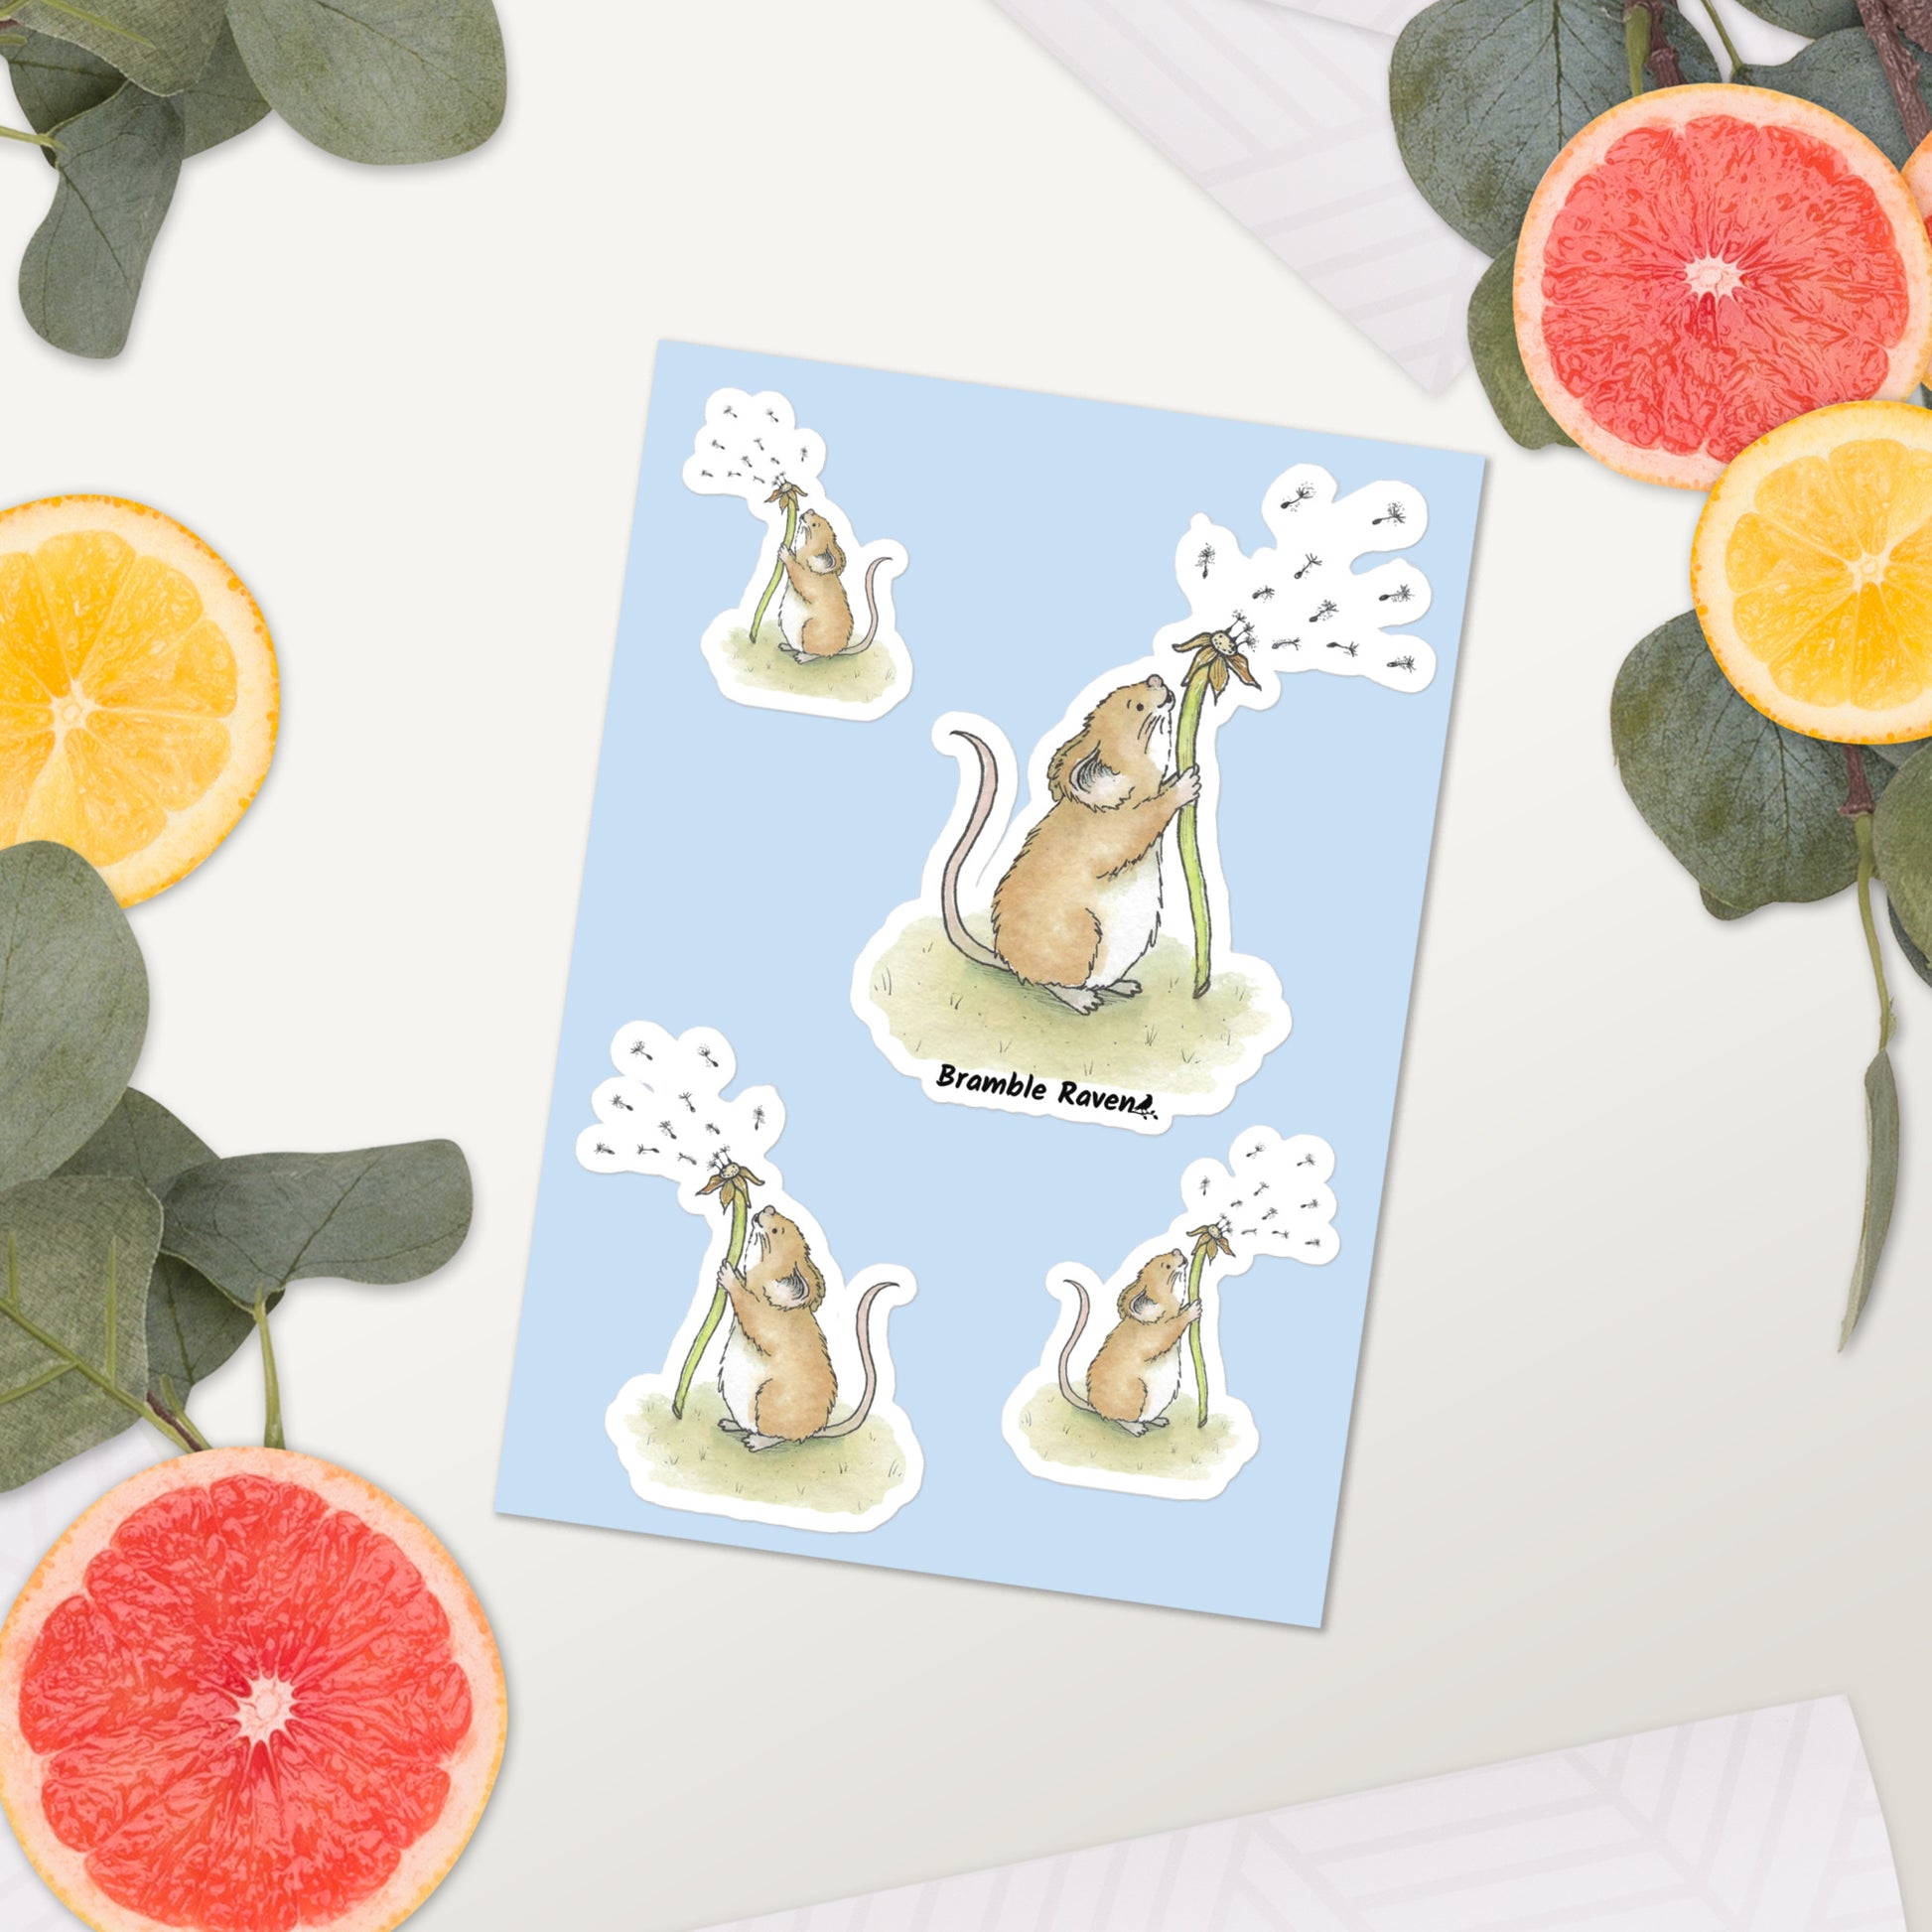 Original Dandelion Wish design of cute watercolor mouse blowing dandelion seeds. Glossy sticker sheet with four mice in different sizes and directions. Each sticker is kiss cut with a white border.  Shown on table surrounded by citrus slices.